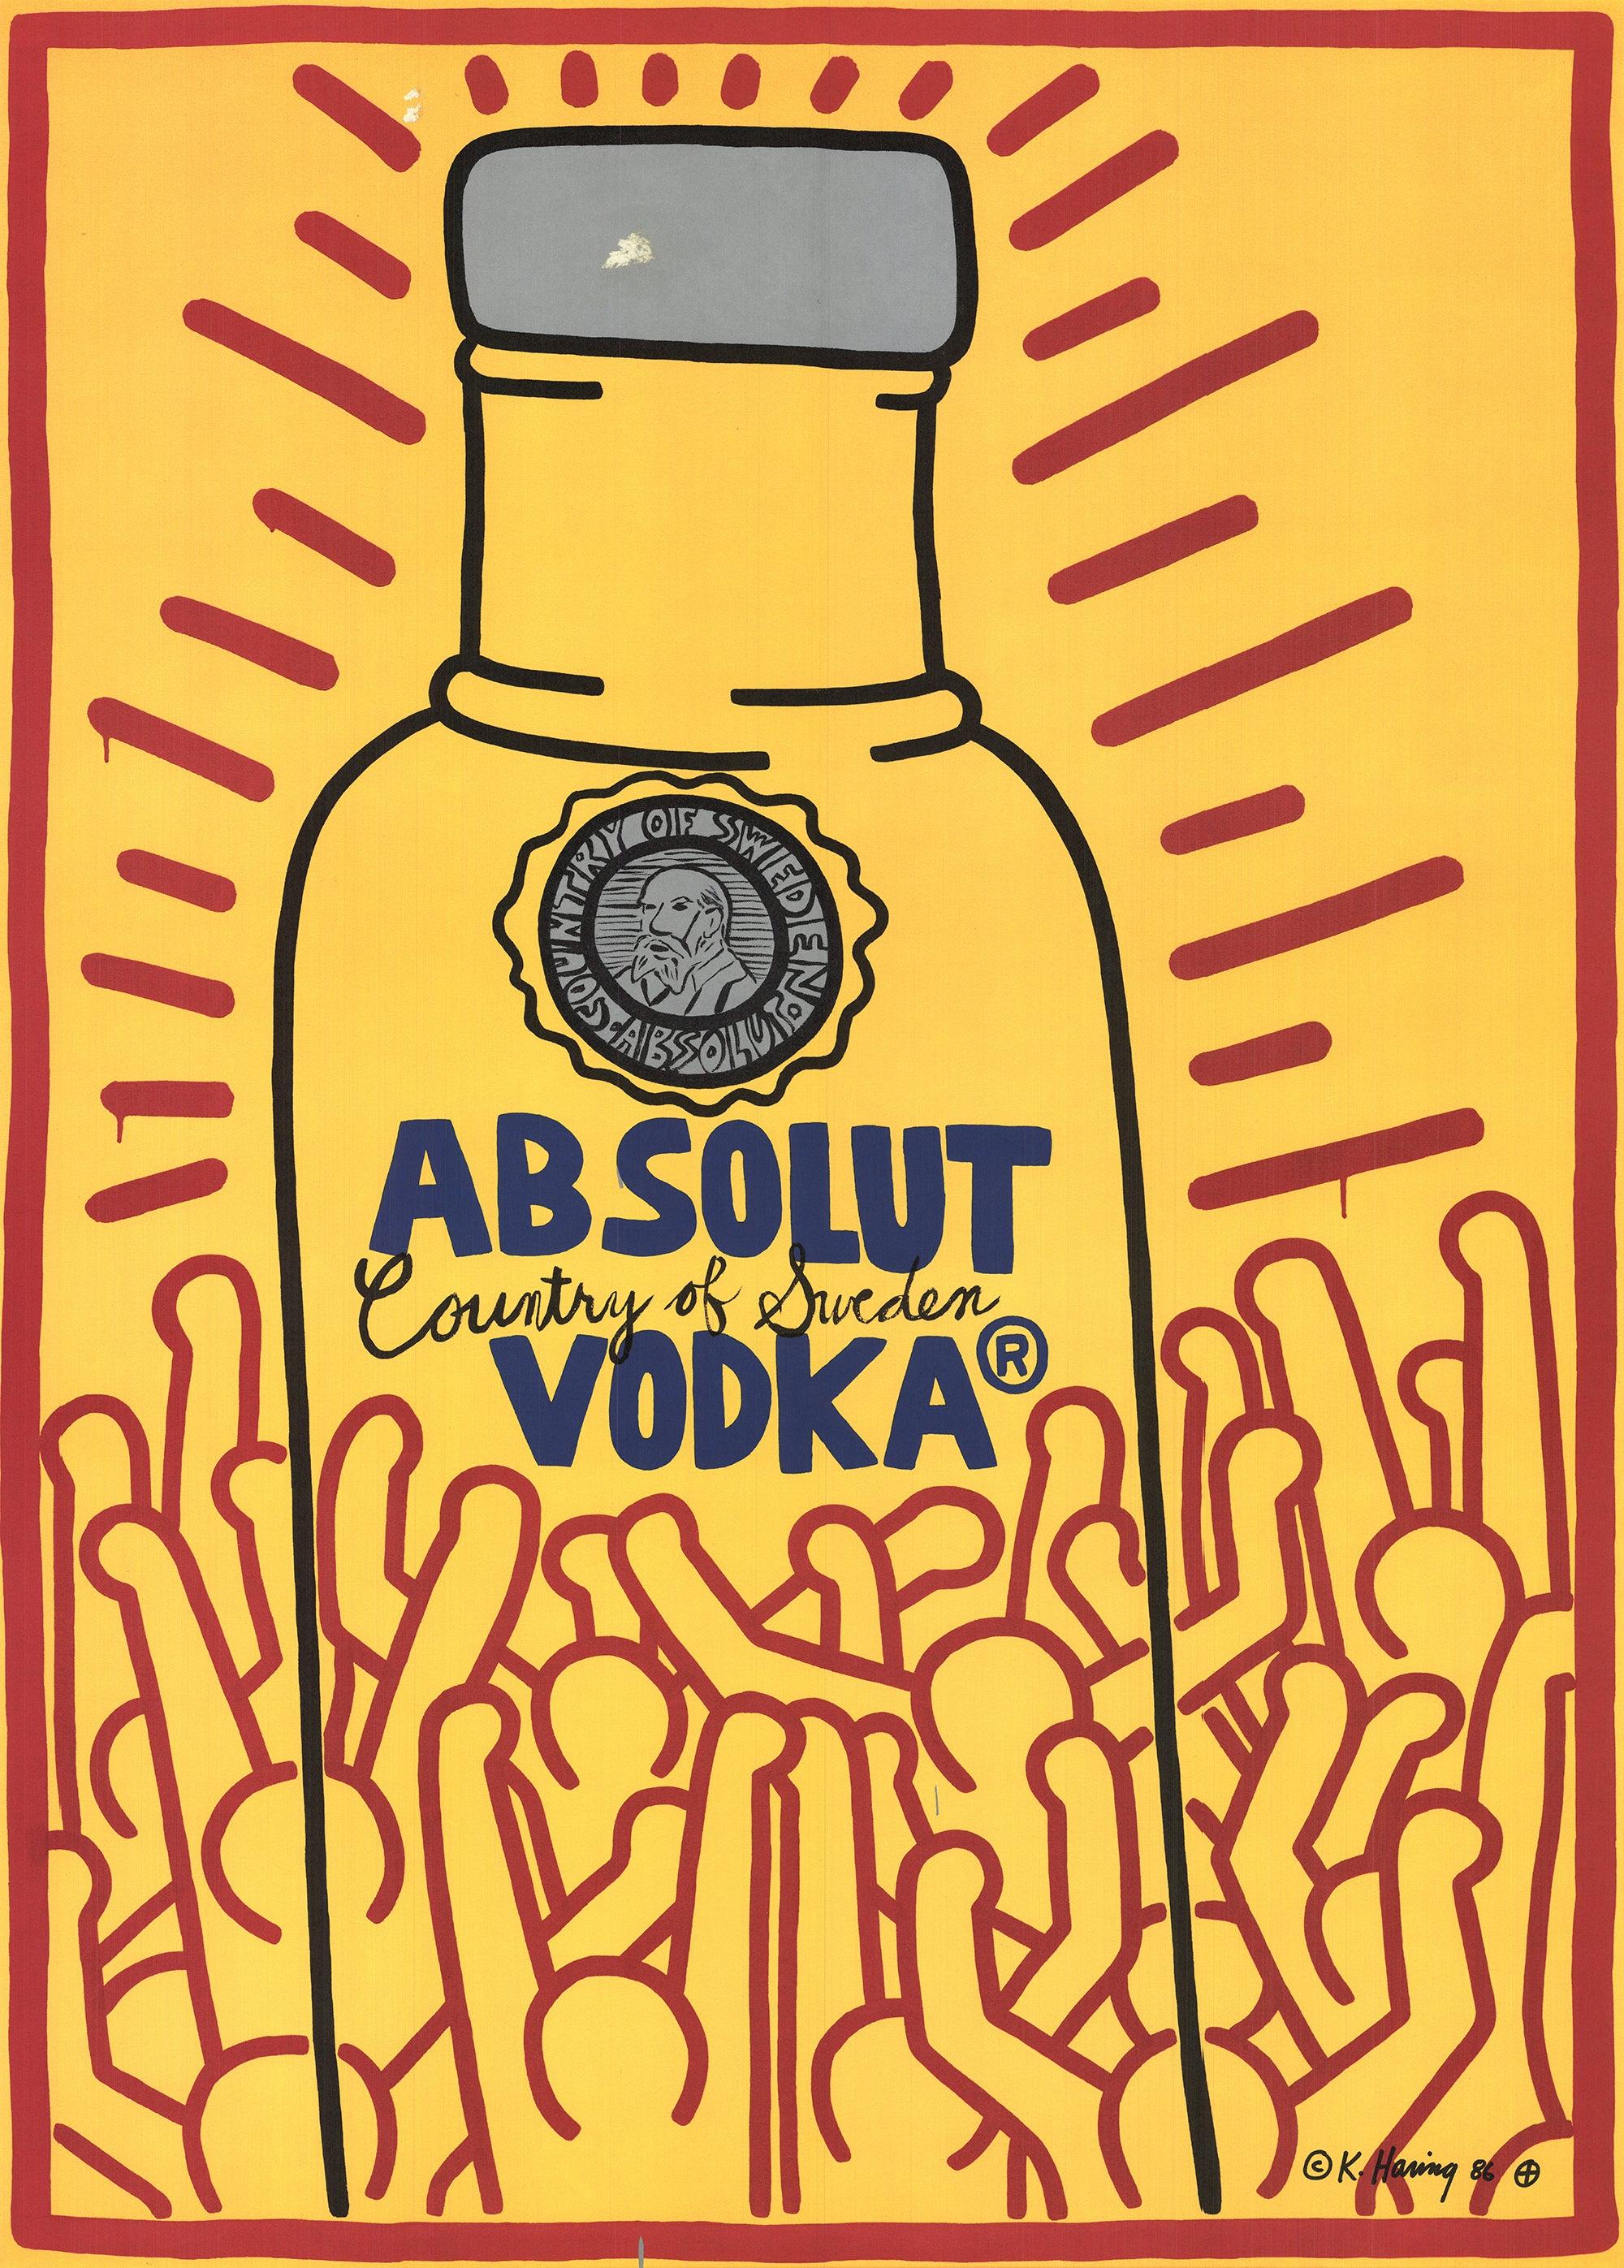 KEITH HARING Absolute Vodka - Pop Art Print by Keith Haring